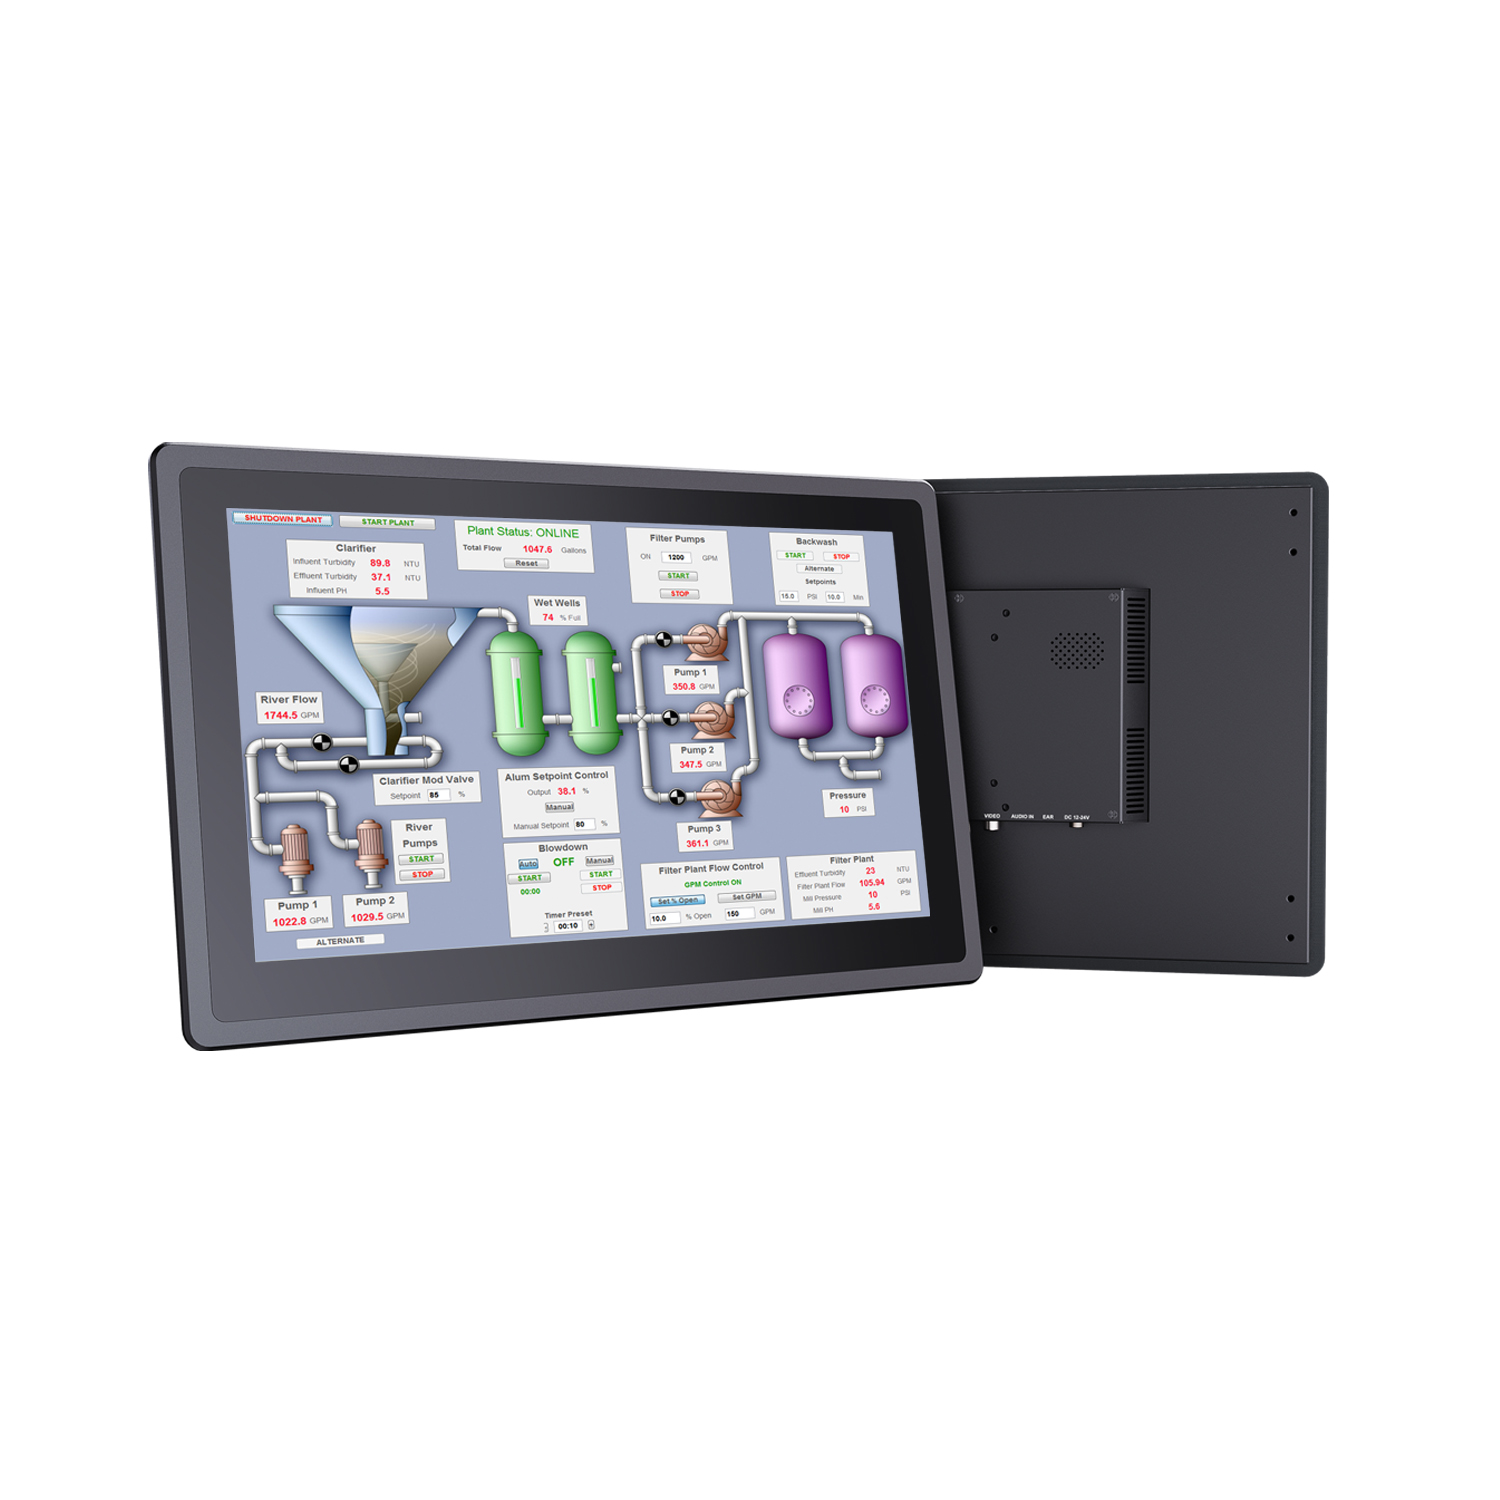 15.6 inch touch screen monitor Featured Image